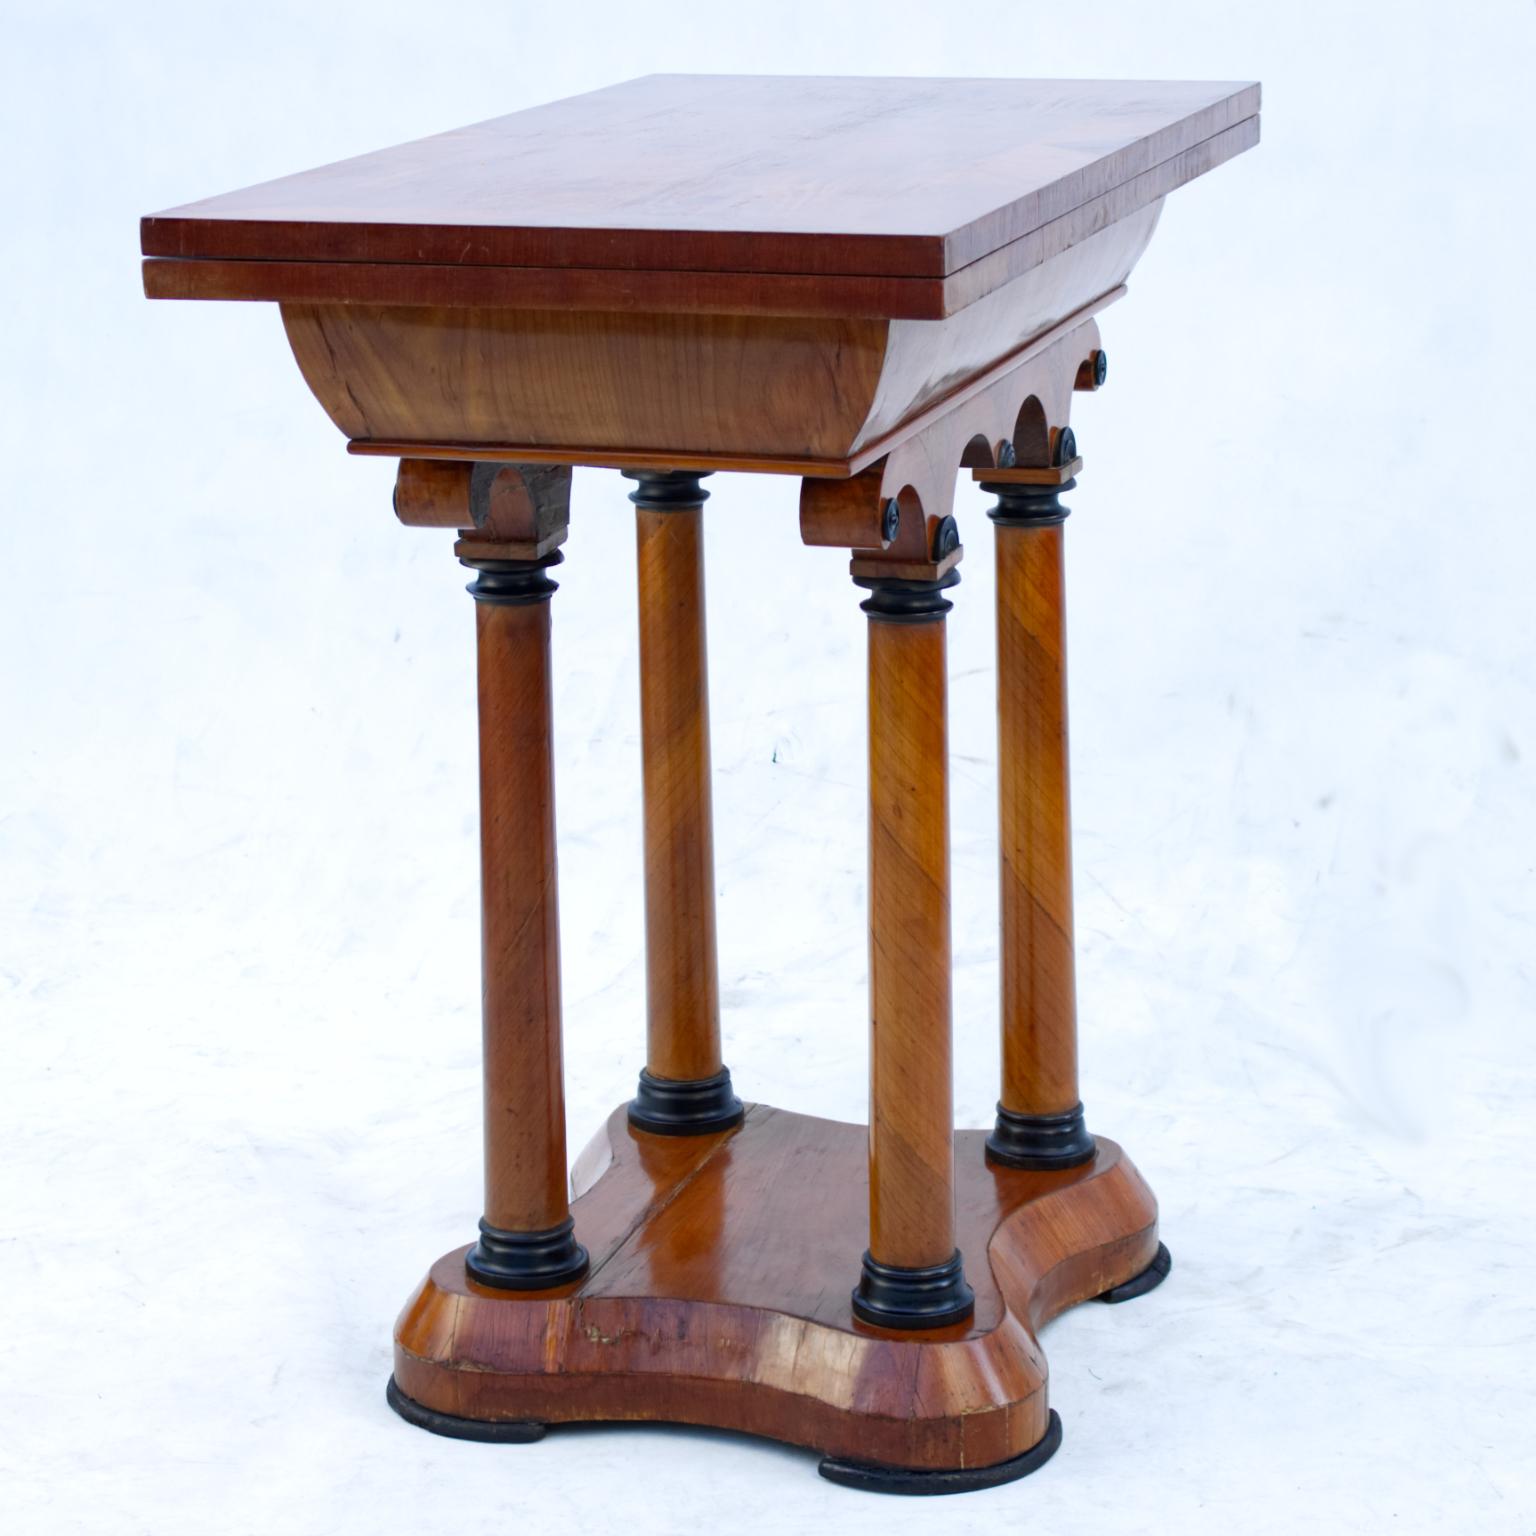 Biedermeier cherrywood console or flip top game table, mid-19th century.
Not restored.